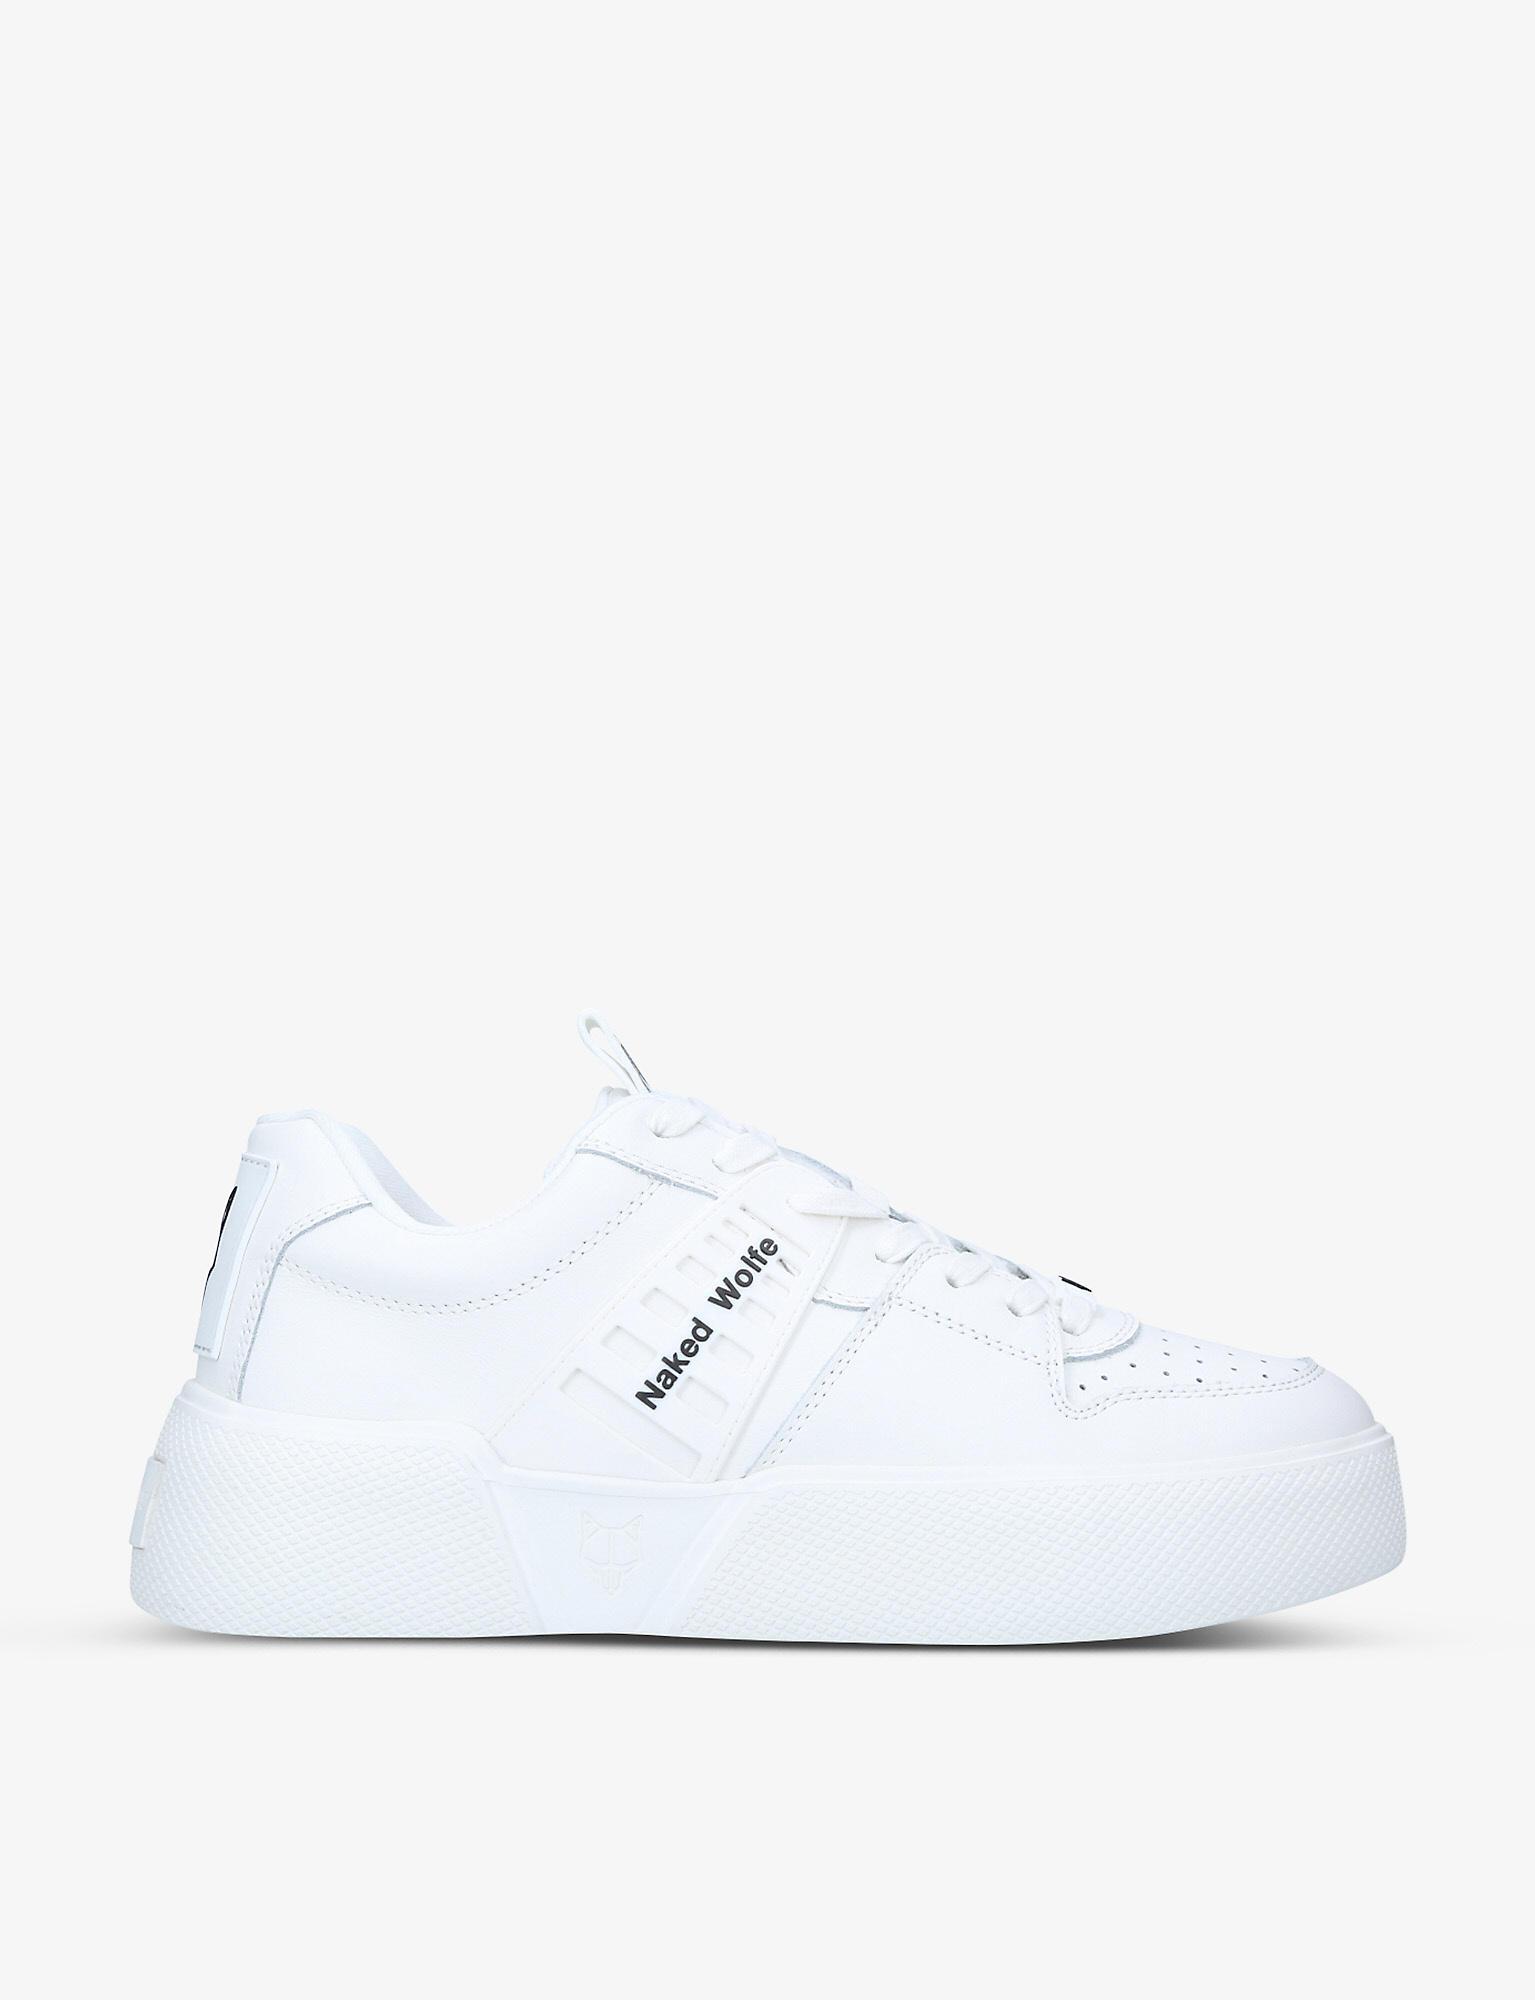 Naked Wolfe Paradox Low Top Leather Trainers In White For Men Lyst 1388